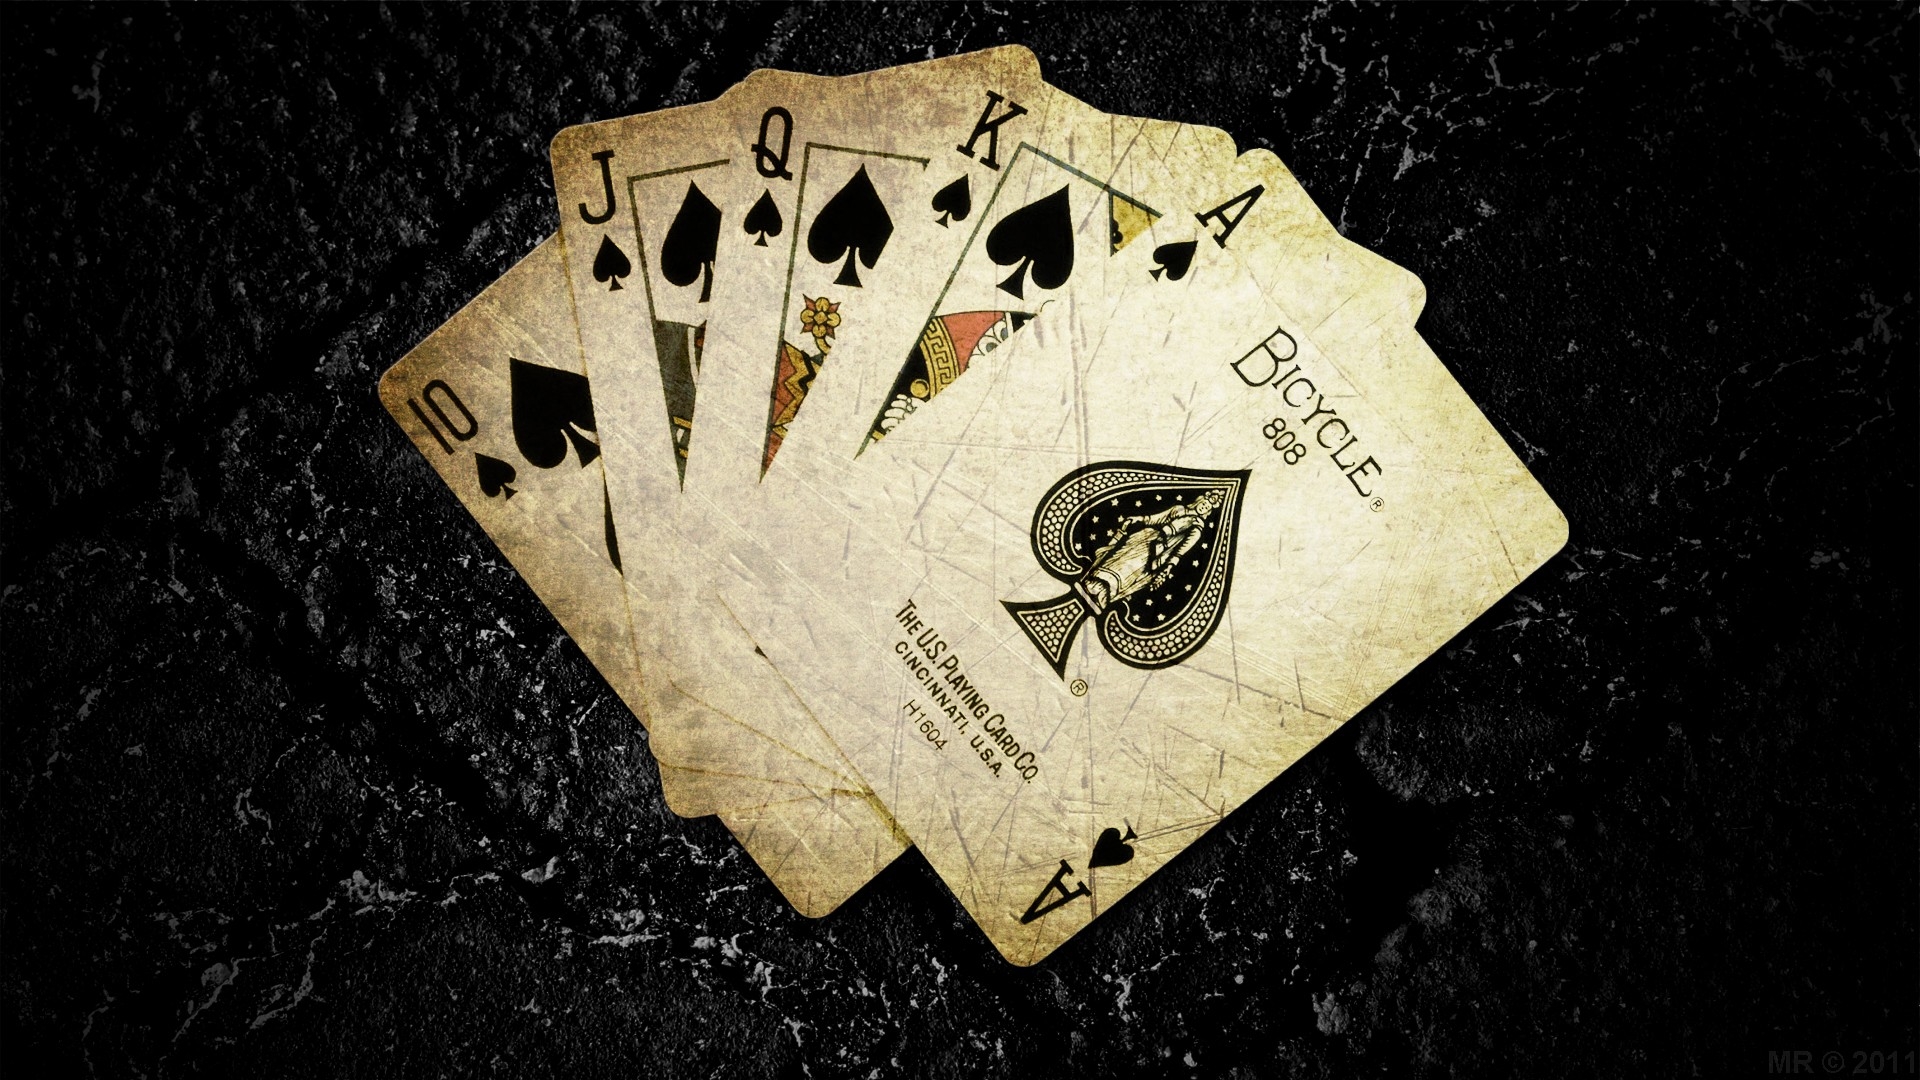  art ace of spades card game dark background play wallpaper background 1920x1080